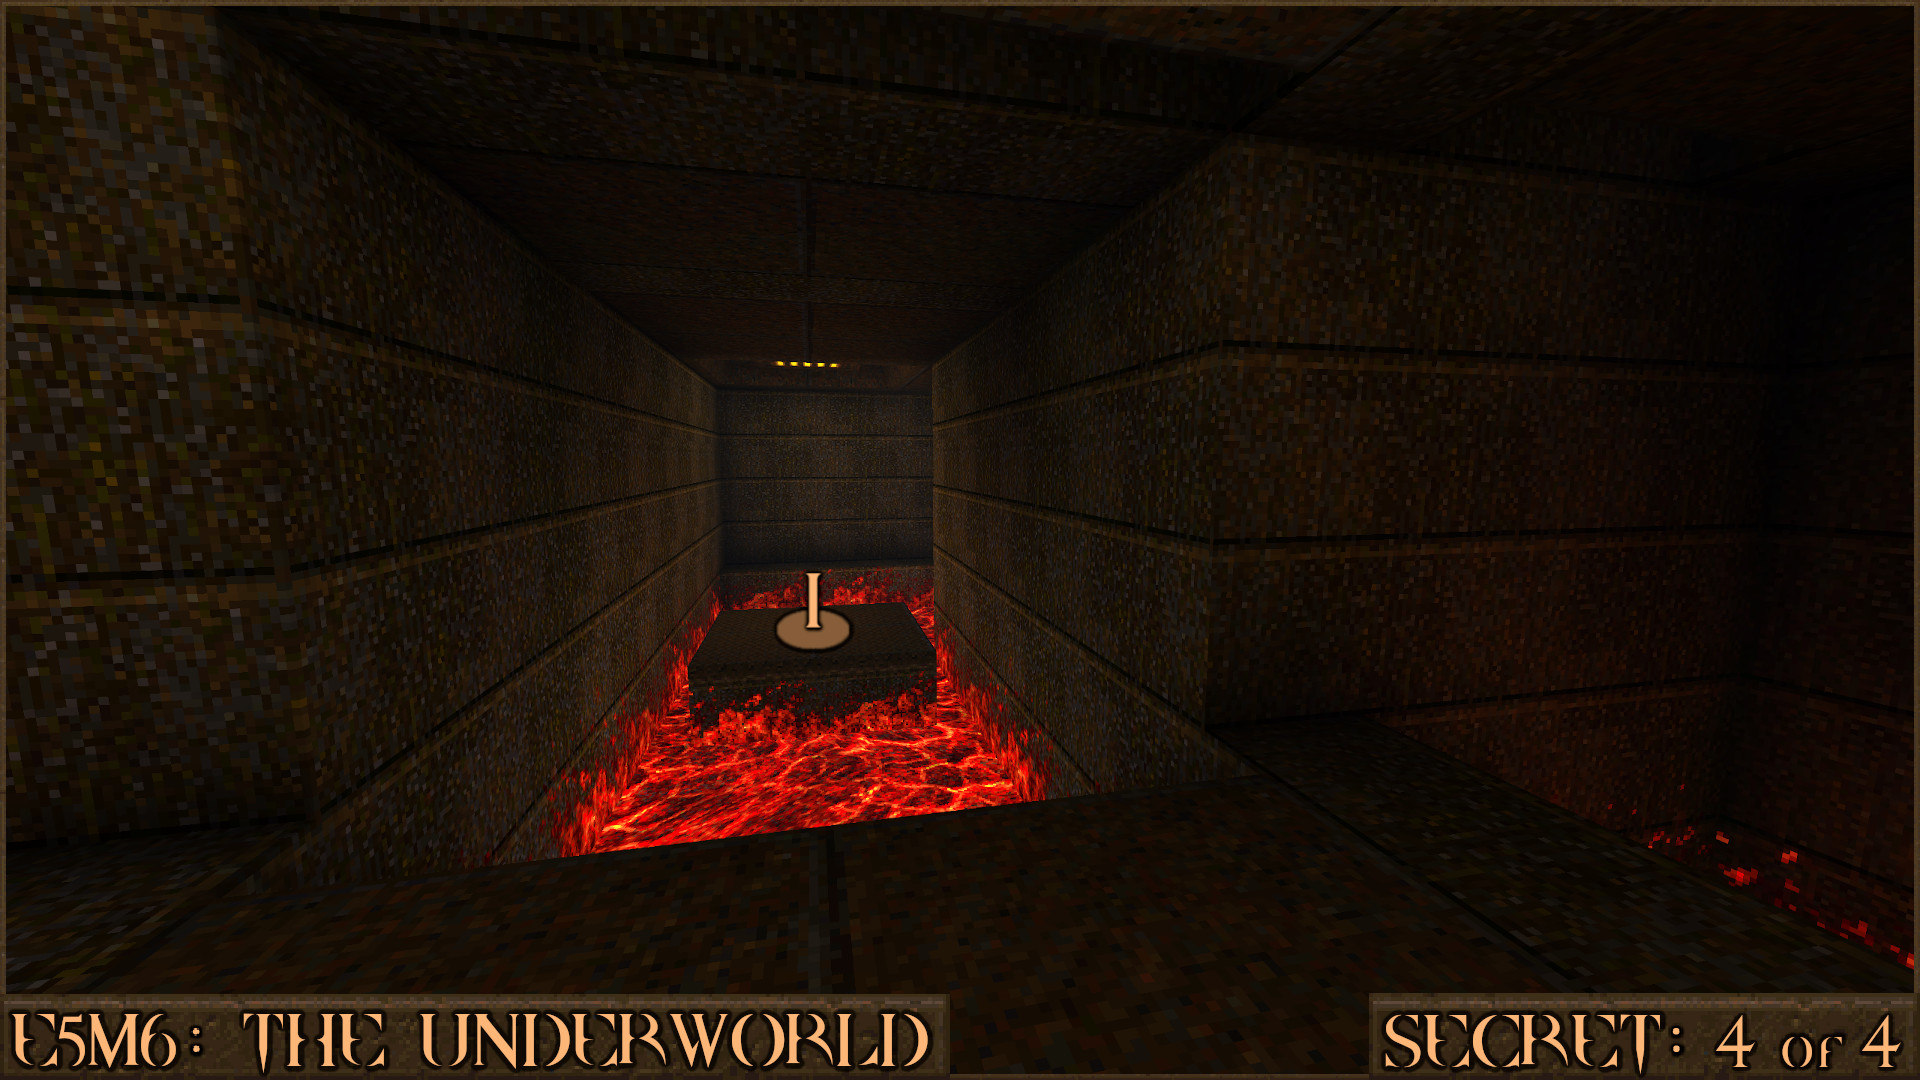 Quake Finding All Secrets in Quake Expansion pack: Dimension of the Past - E5M6: The Underworld - EF4DD28